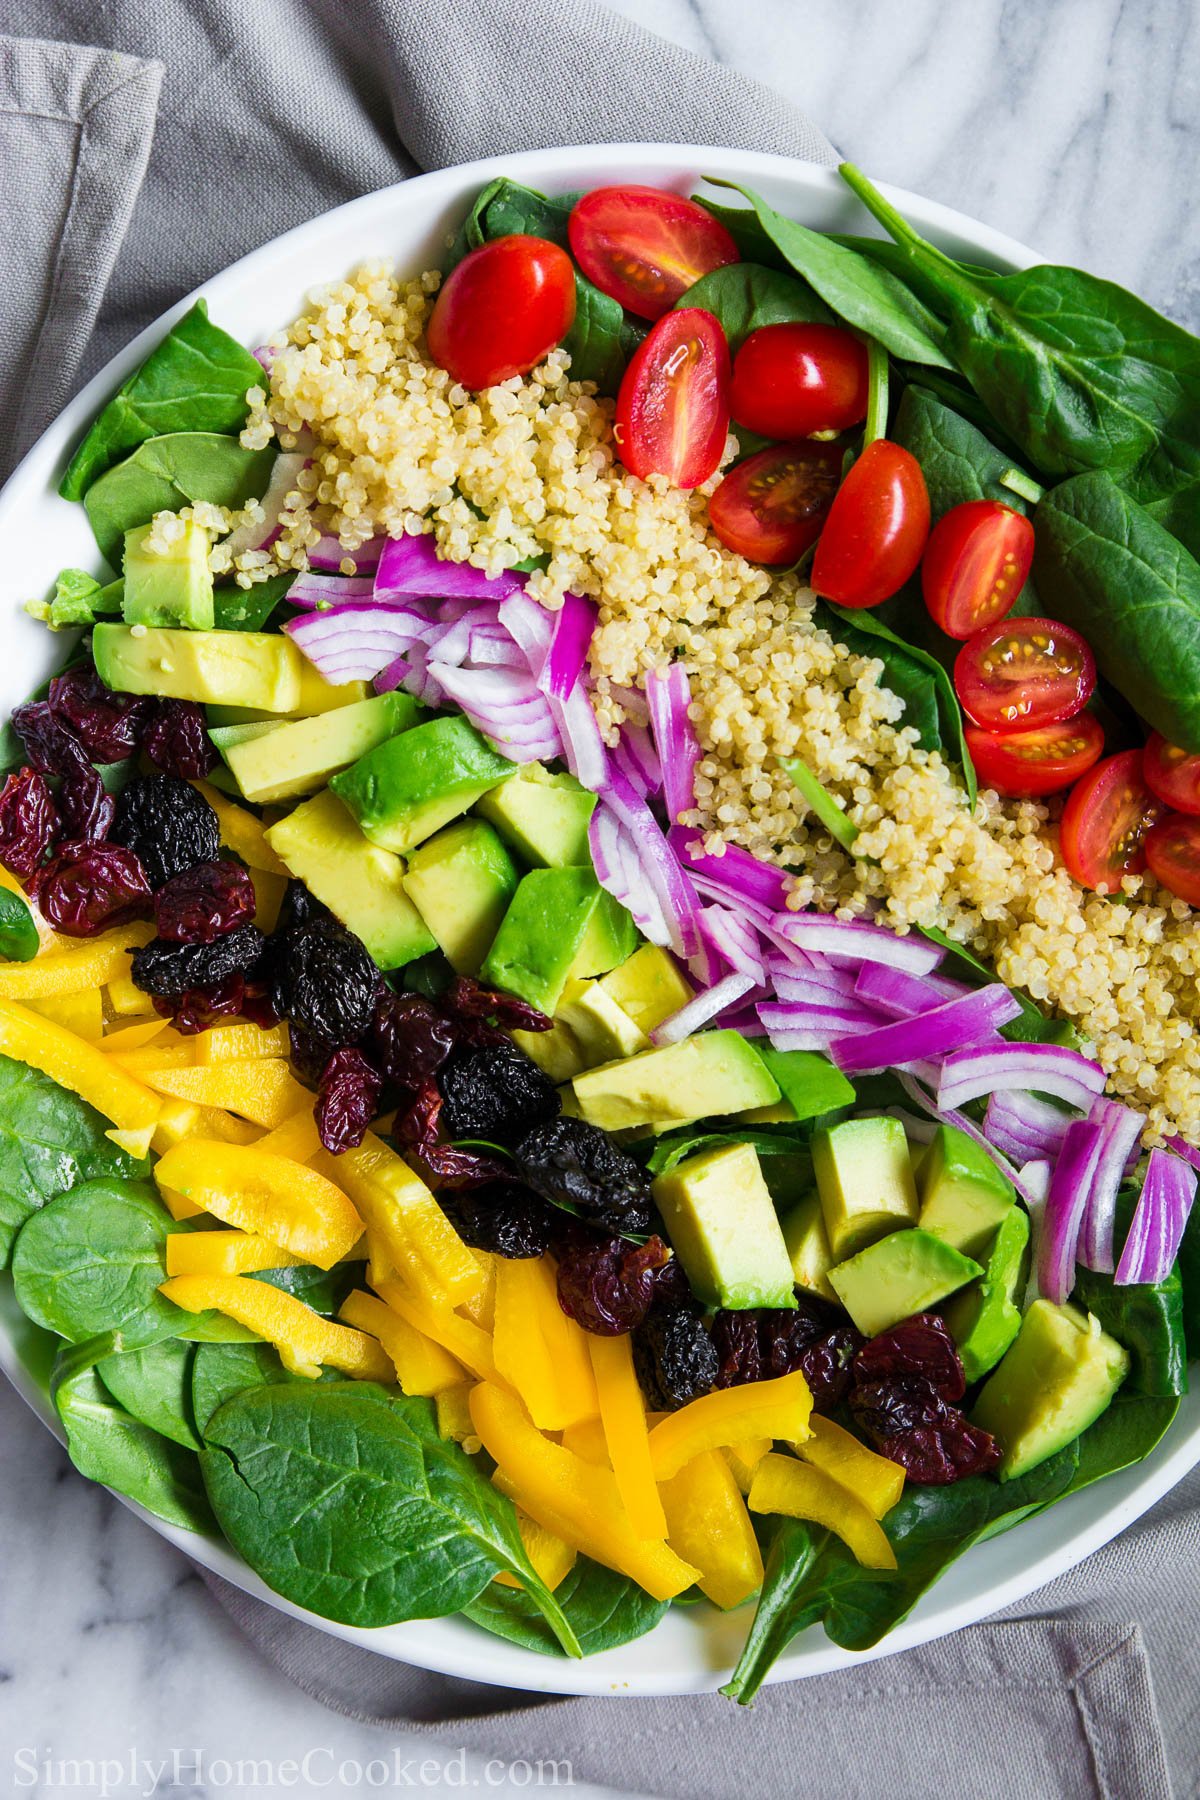 A Spinach Salad topped with cherry tomatoes, red onion, avocado, bell pepper, dried cherries, and cooked quinoa,